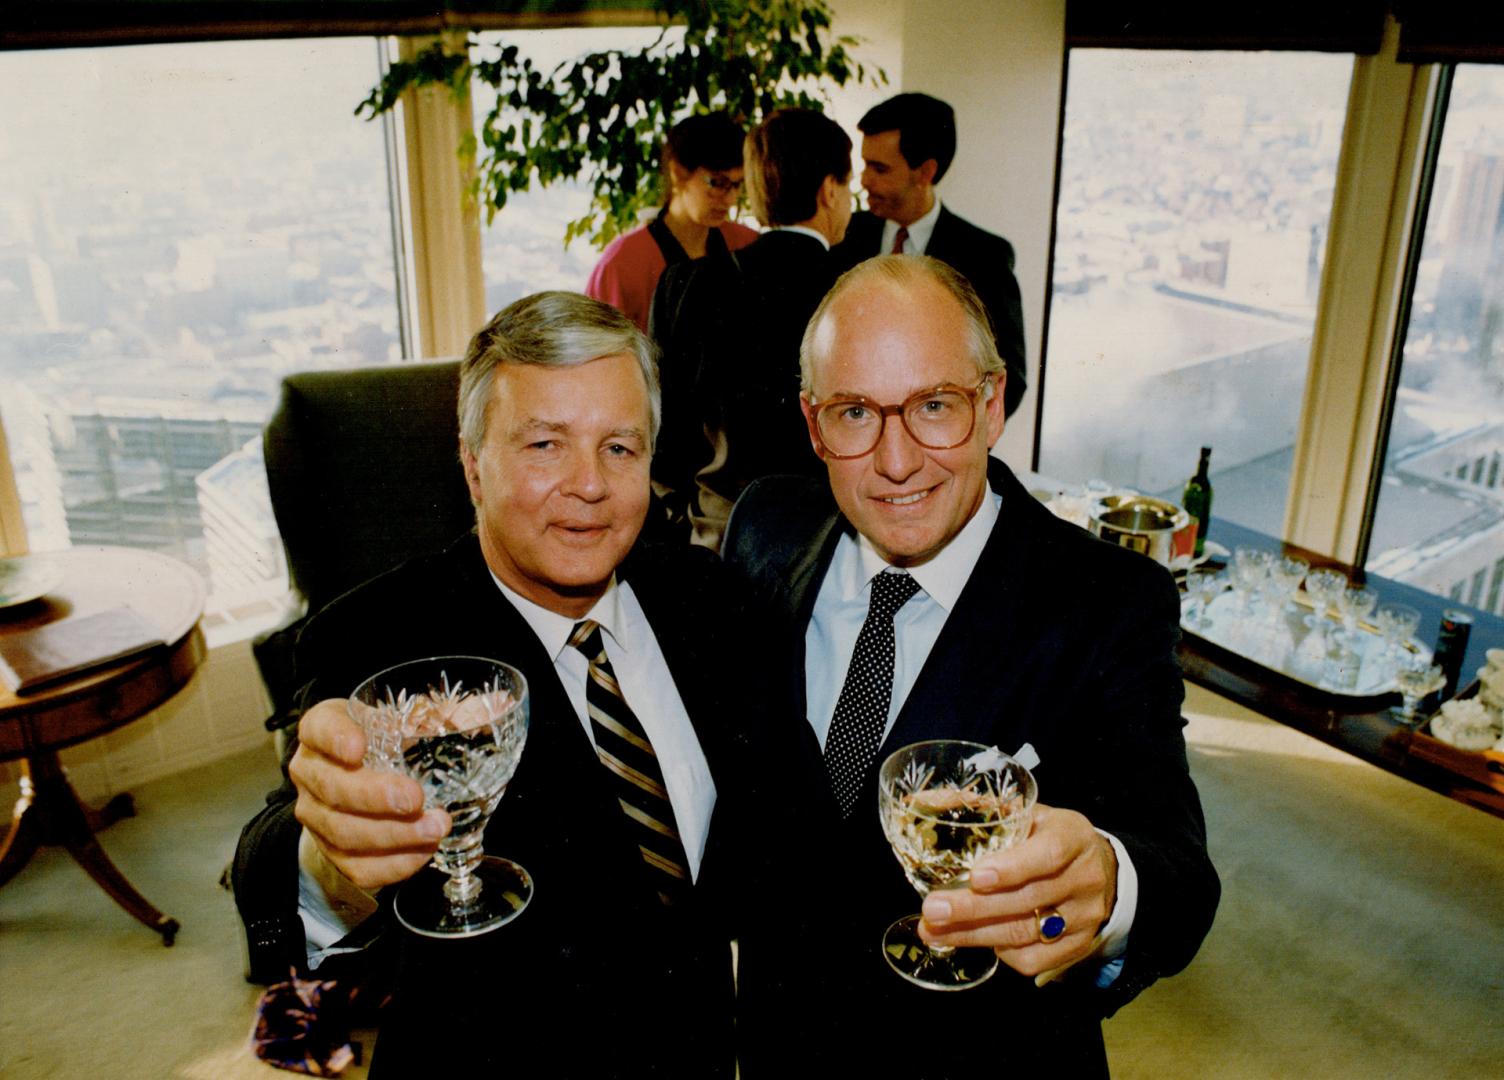 Edmund King, left, Wood Gundy chairman, and Michael Sanderson, Merrill Lynch president, toast deal that sees Gundy acquire Merrill's retail business.